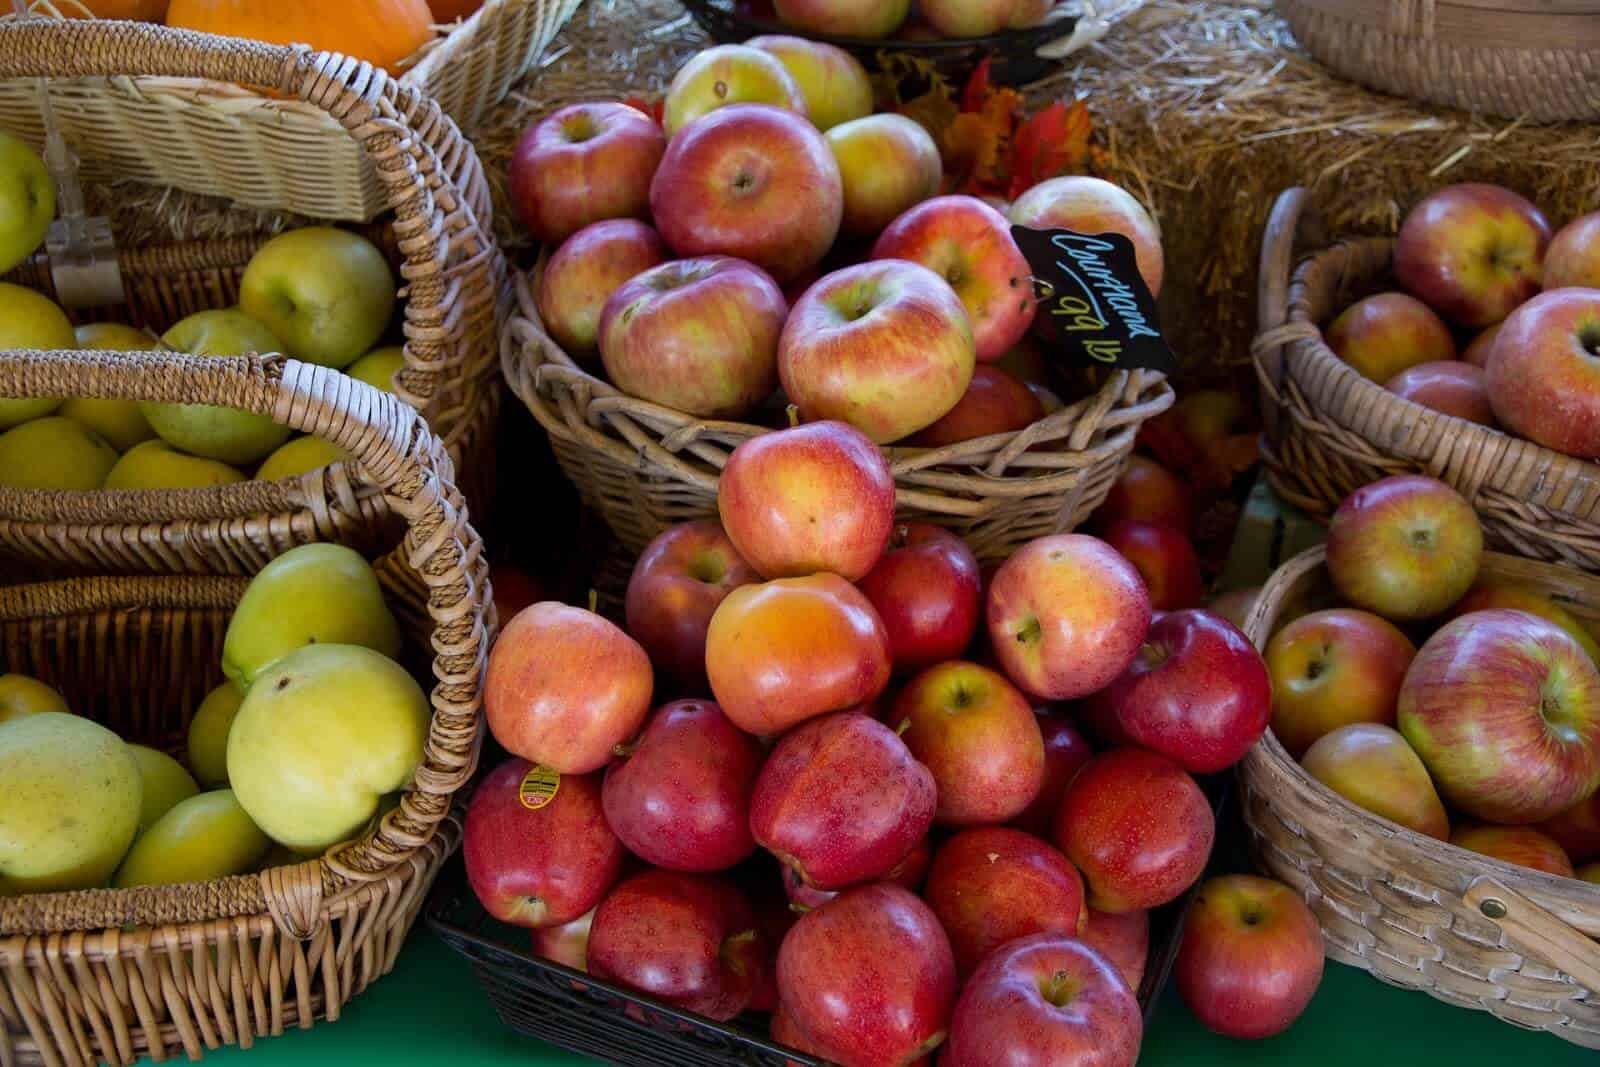 Red apples and green apples in baskets